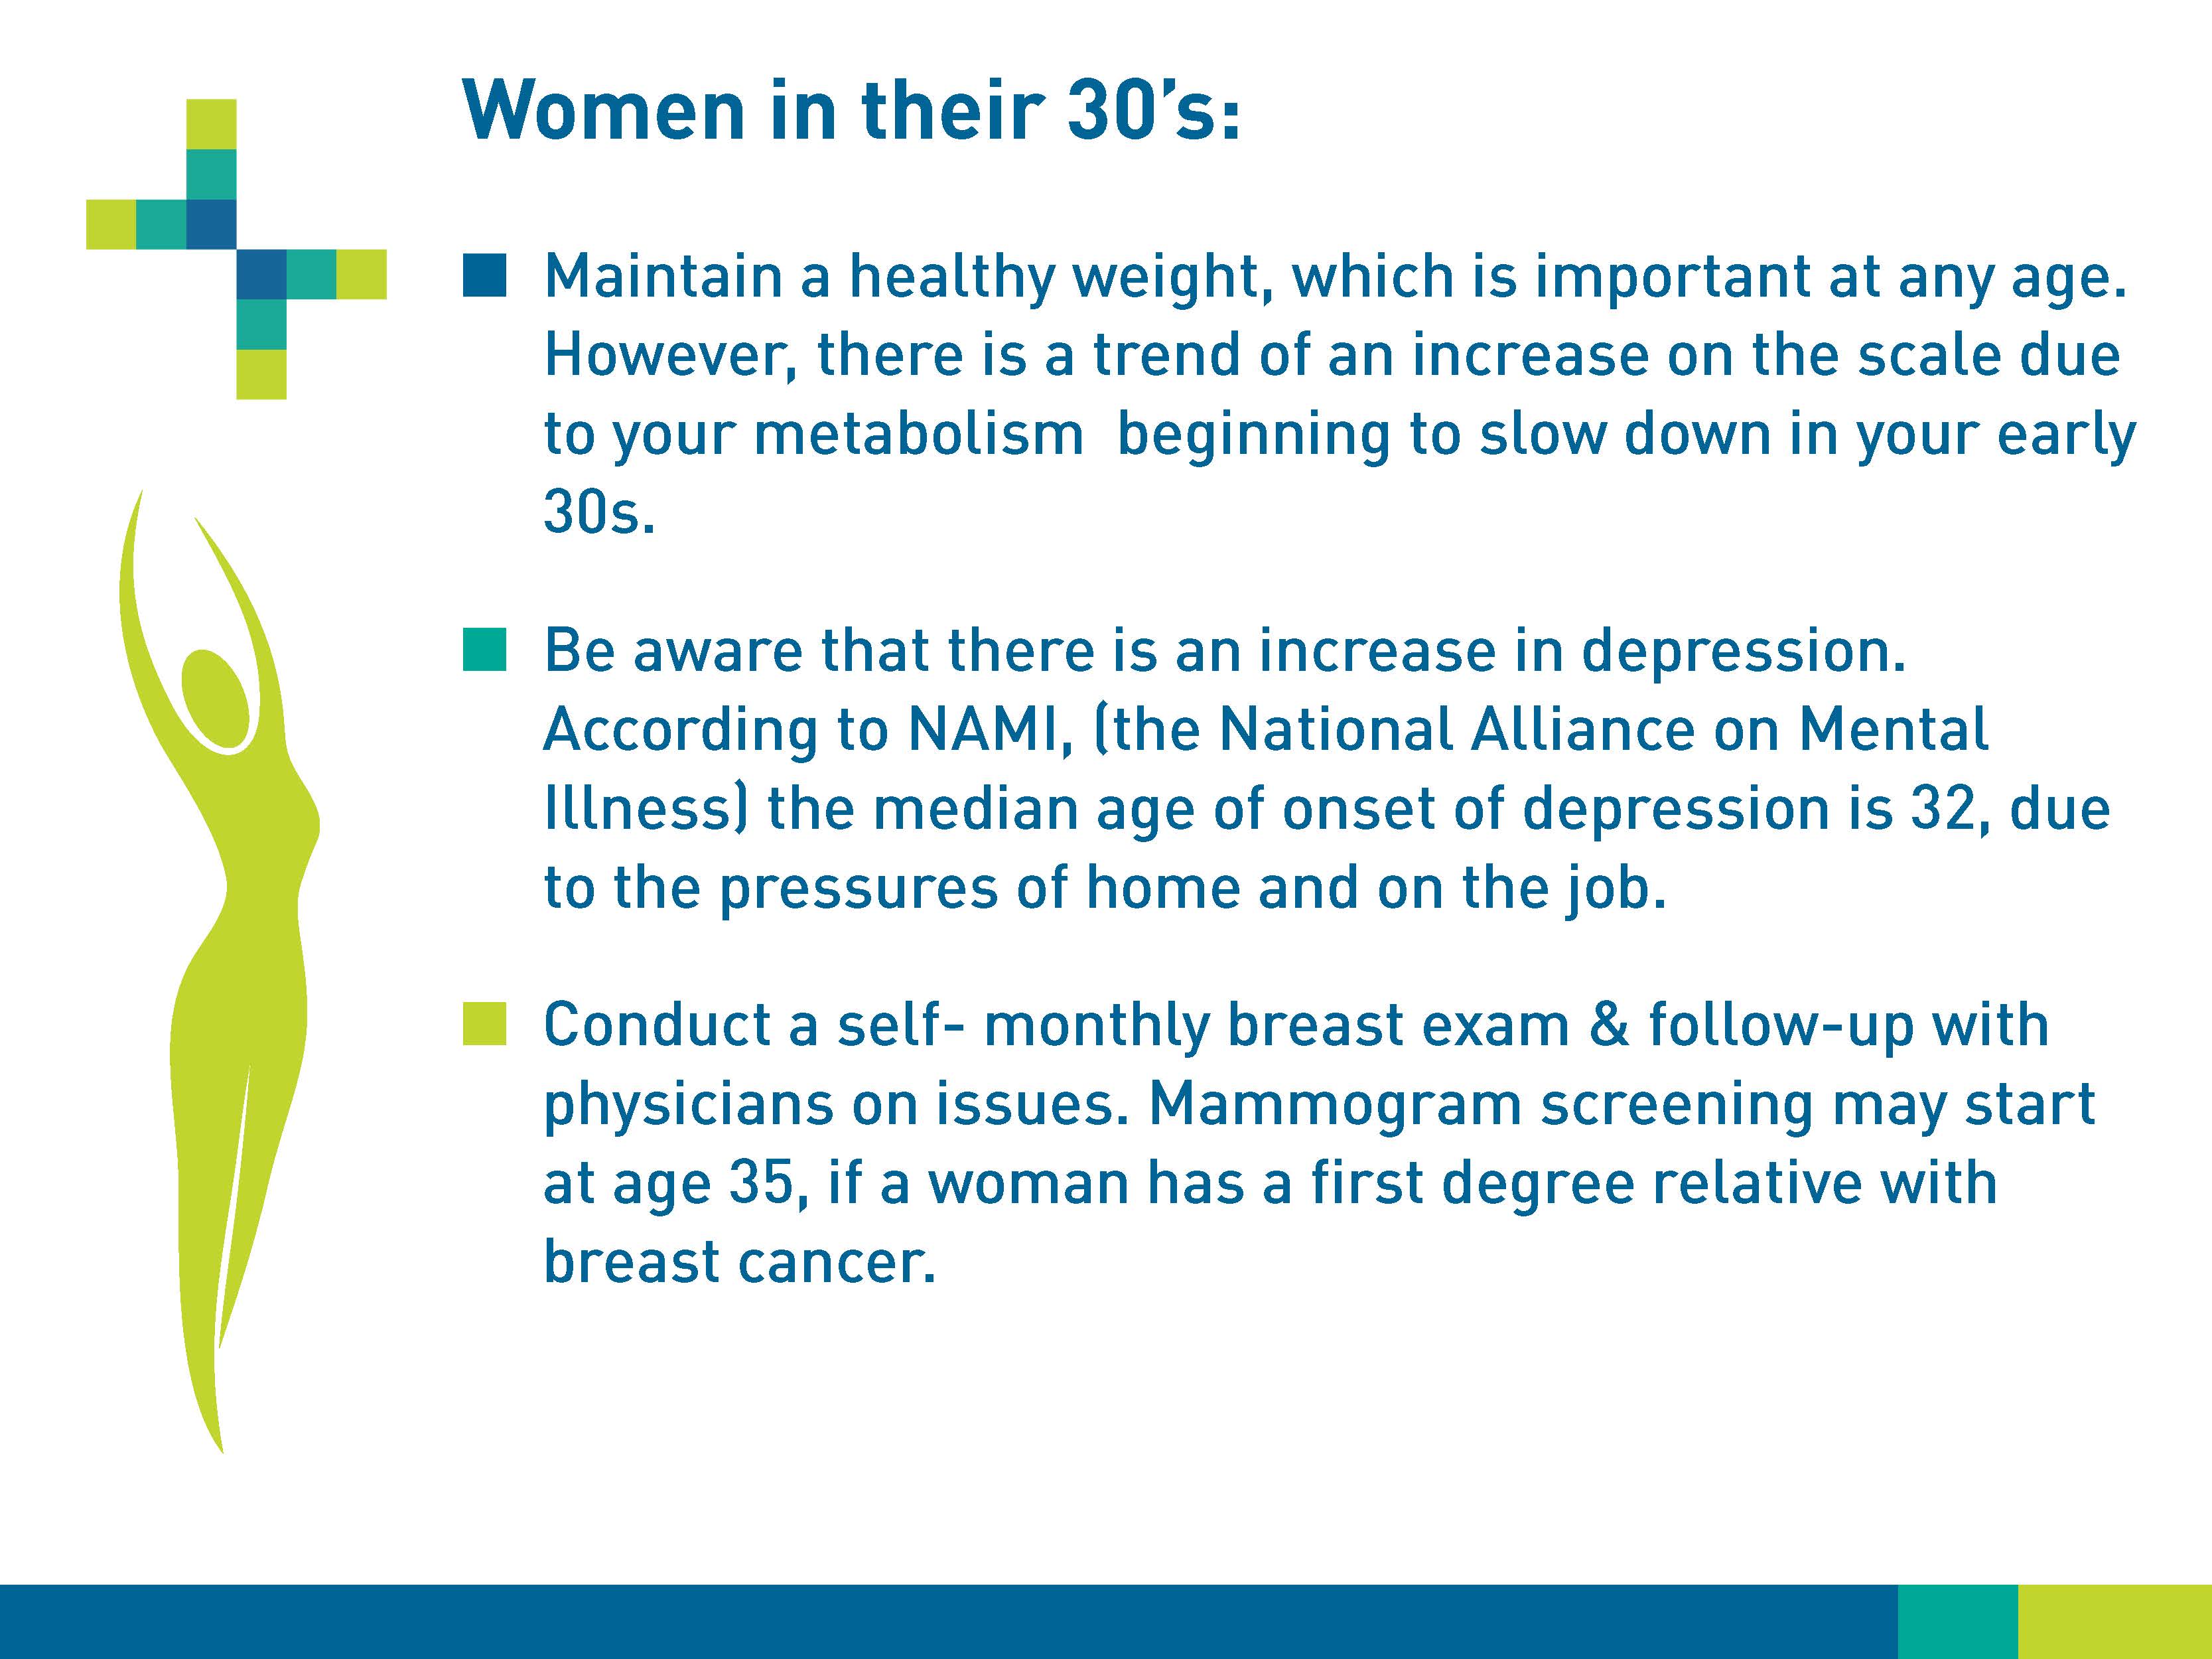 Women in their 30s: Maintain a healthy weight, which is important at any age. However, there is a trend of an increase on the scale due to the metabolism beginning to slow down in your early 30s. Be aware that there is an increase in depression. According to NAMI, the median age of onset of depression is 32, due to the pressures of home and on the job. Conduct a self-monthly breast exam & follow-up with physicians on issues. Mammogram screening may start at age 35, if a woman has a first degree relative with breast cancer.